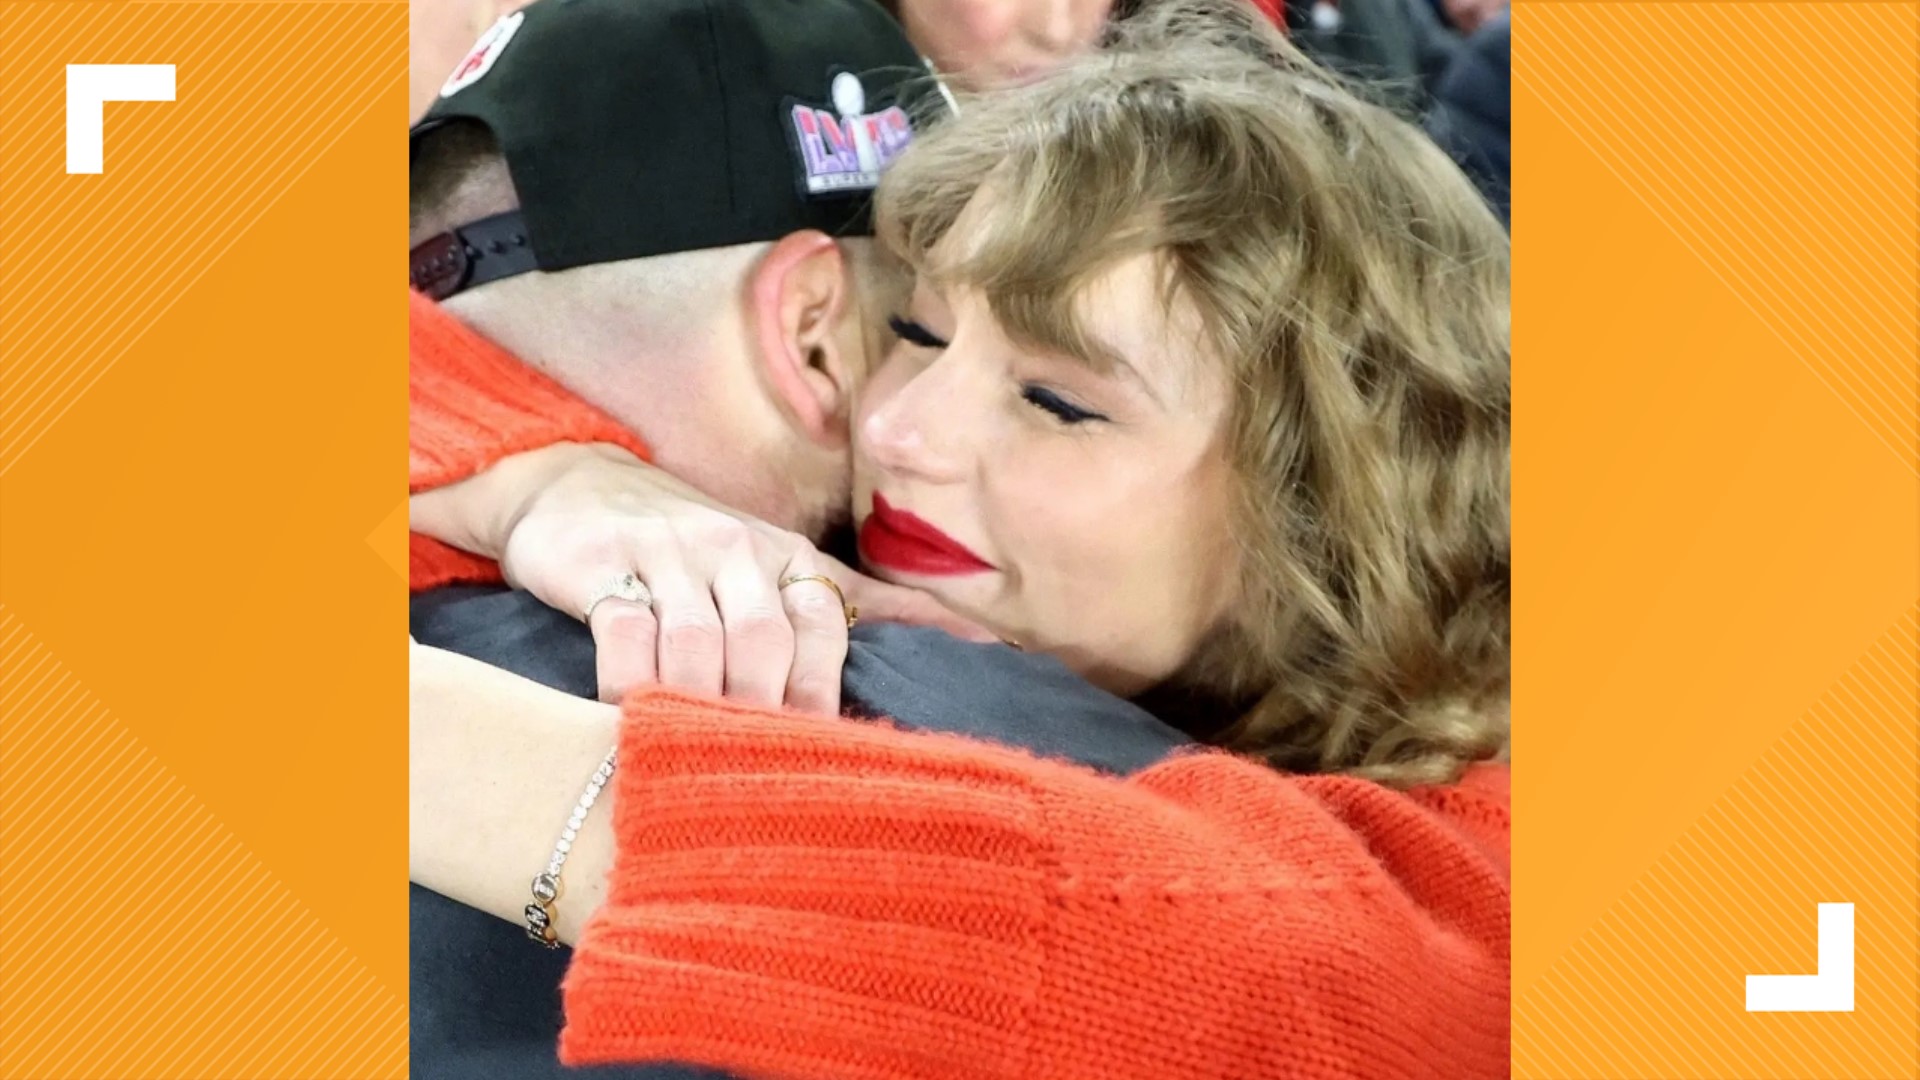 Wove has gone viral after the singer was spotted wearing the diamond bracelet at Sunday's AFC Championship.